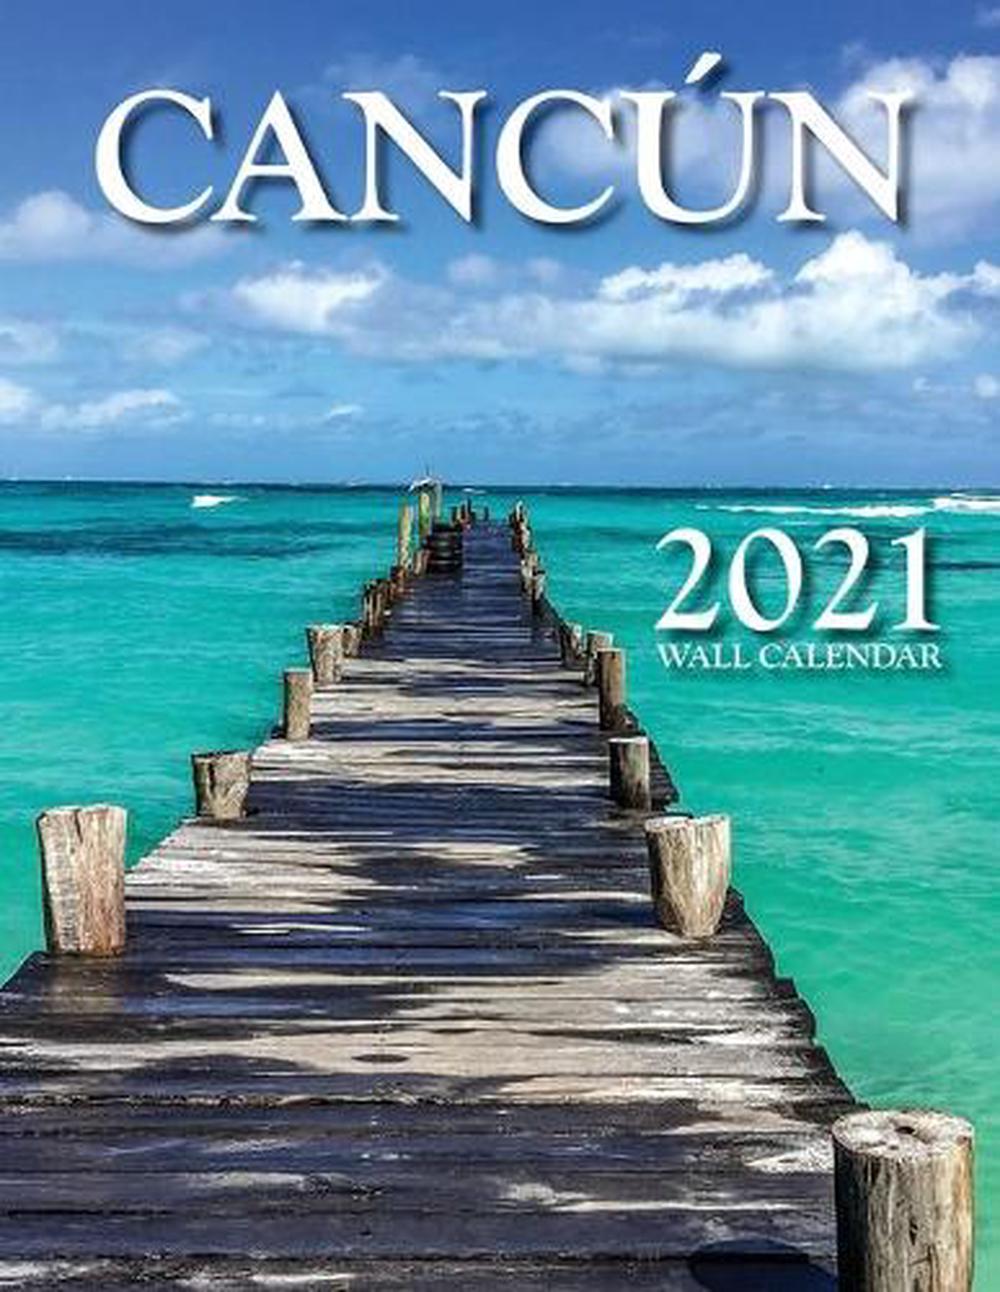 Cancun 2021 Wall Calendar by Just Be (English) Paperback Book Free